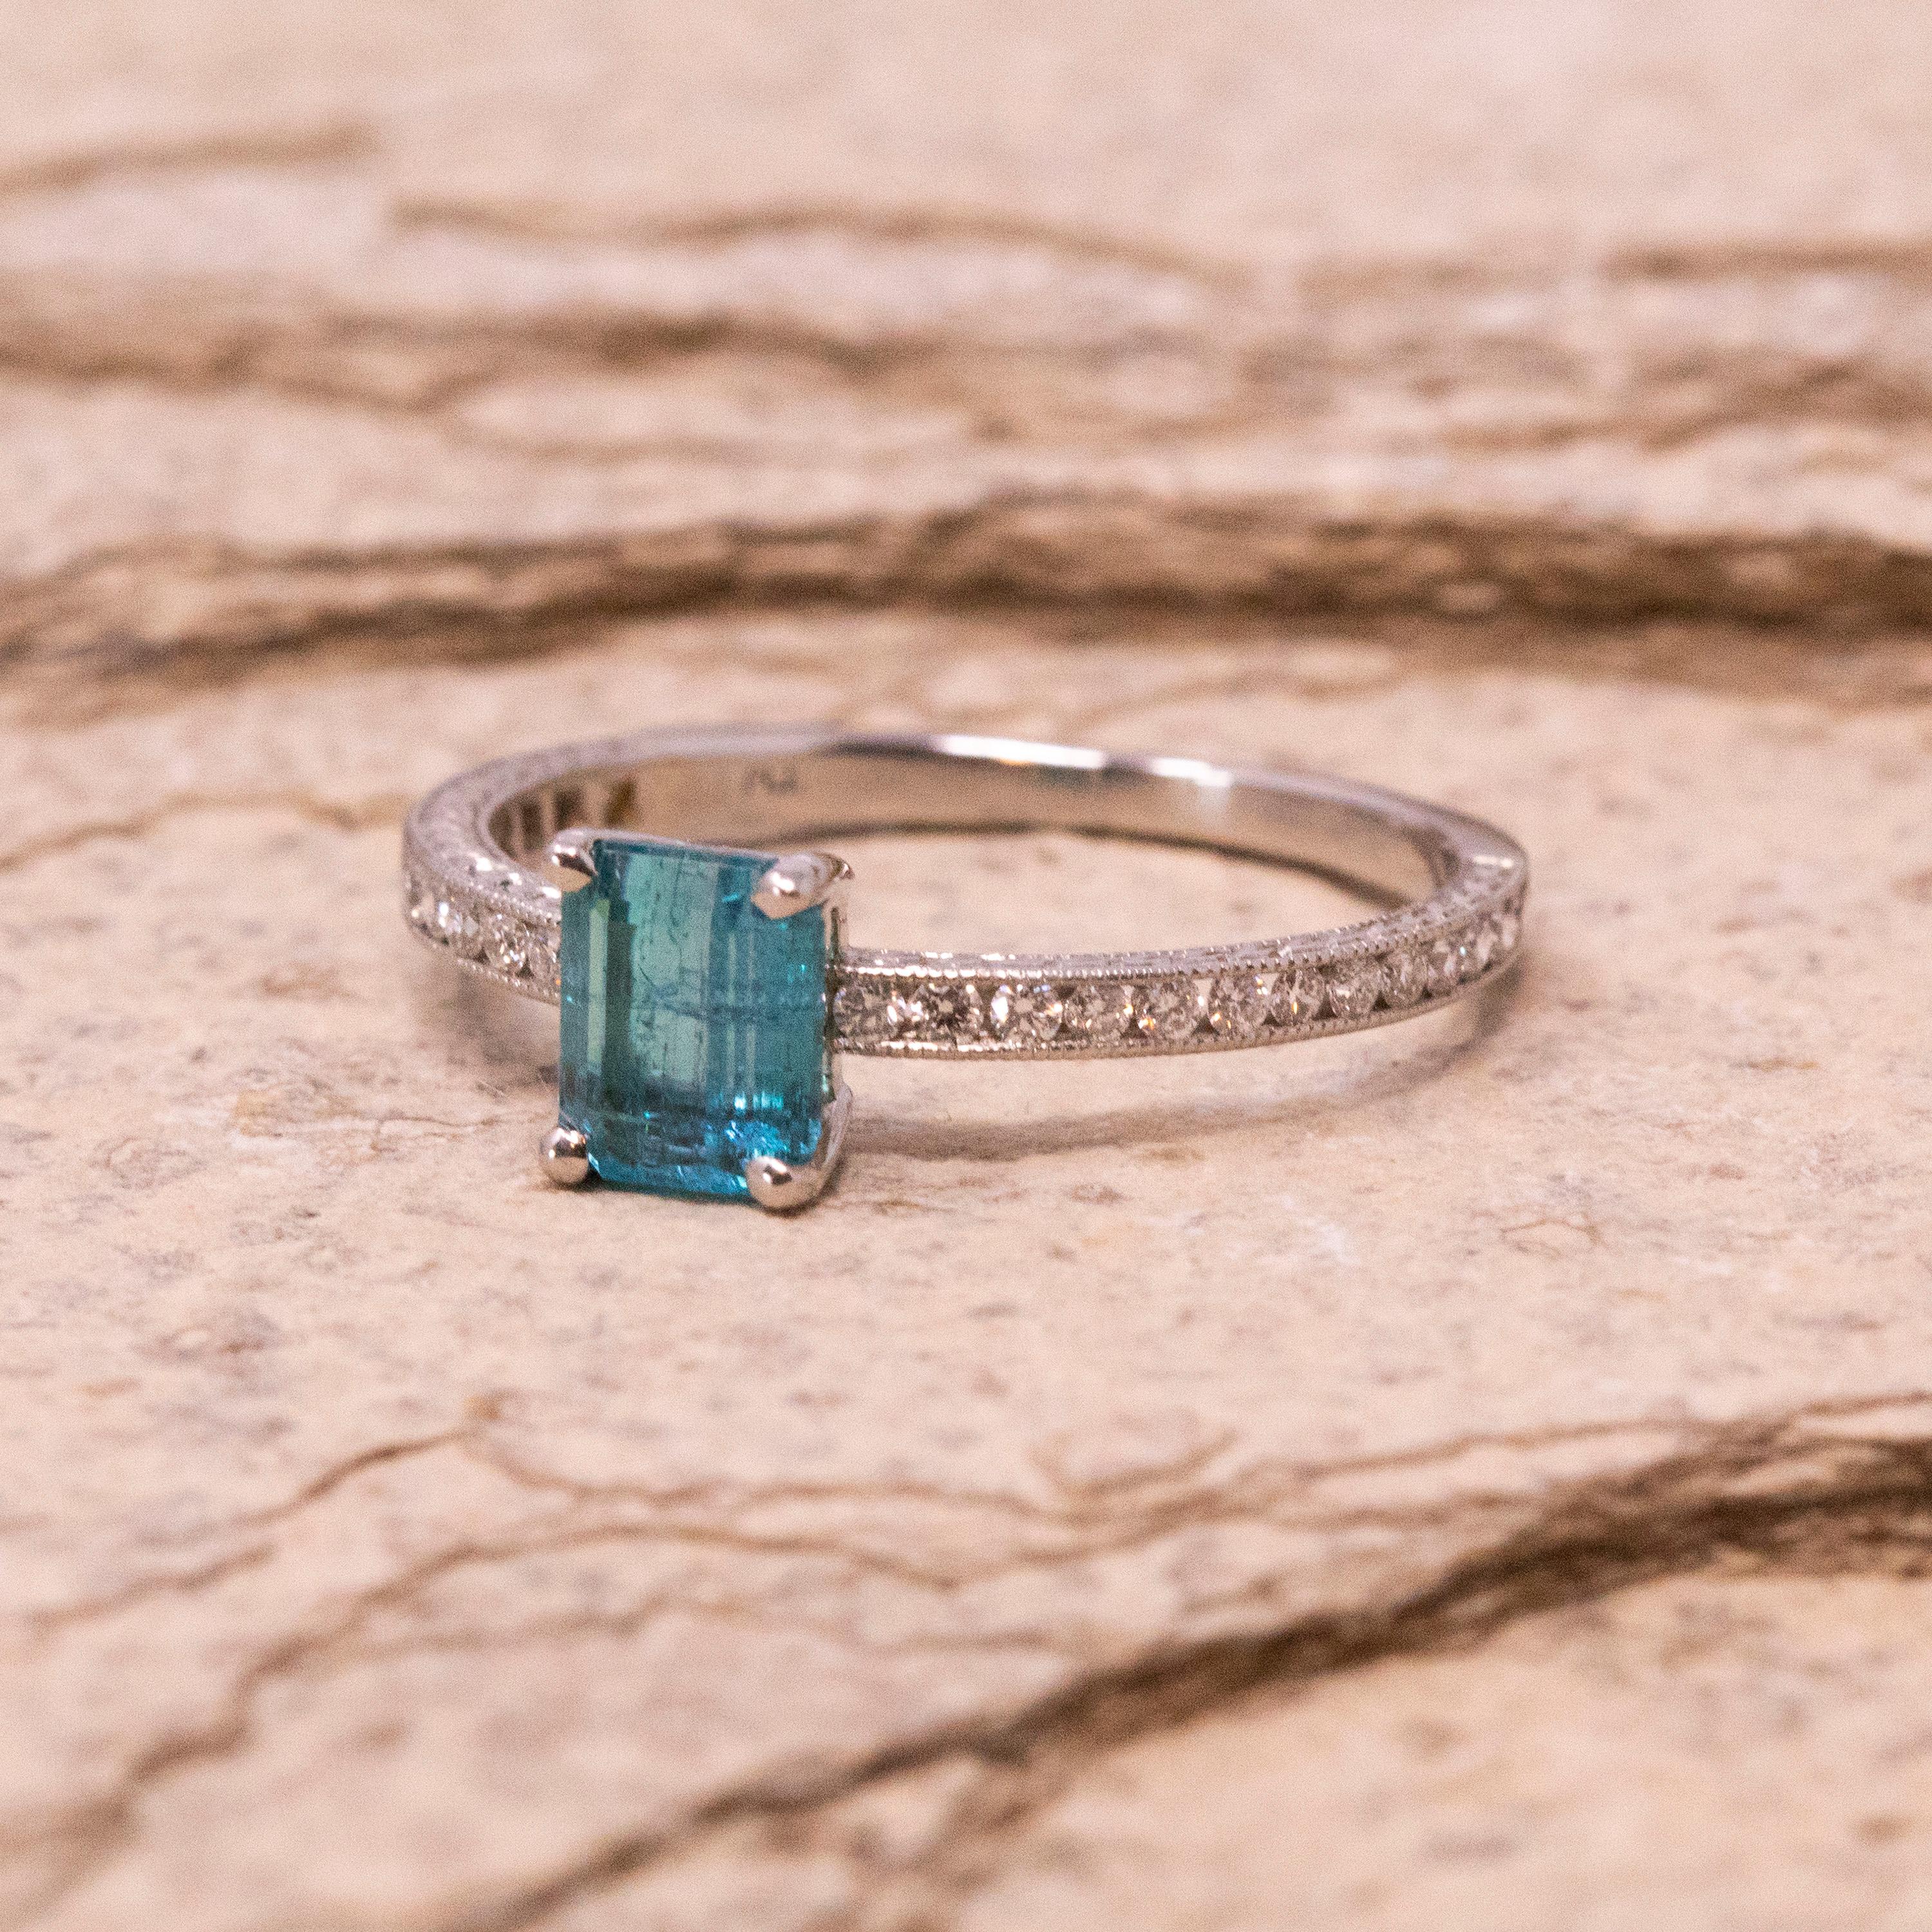 Immerse yourself in the captivating beauty of one of the world's most coveted gemstones: the Brazilian Paraiba Tourmaline. Renowned for intense and neon blues and greens, the original copper-bearing tourmalines from Brazil grow ever rarer with each